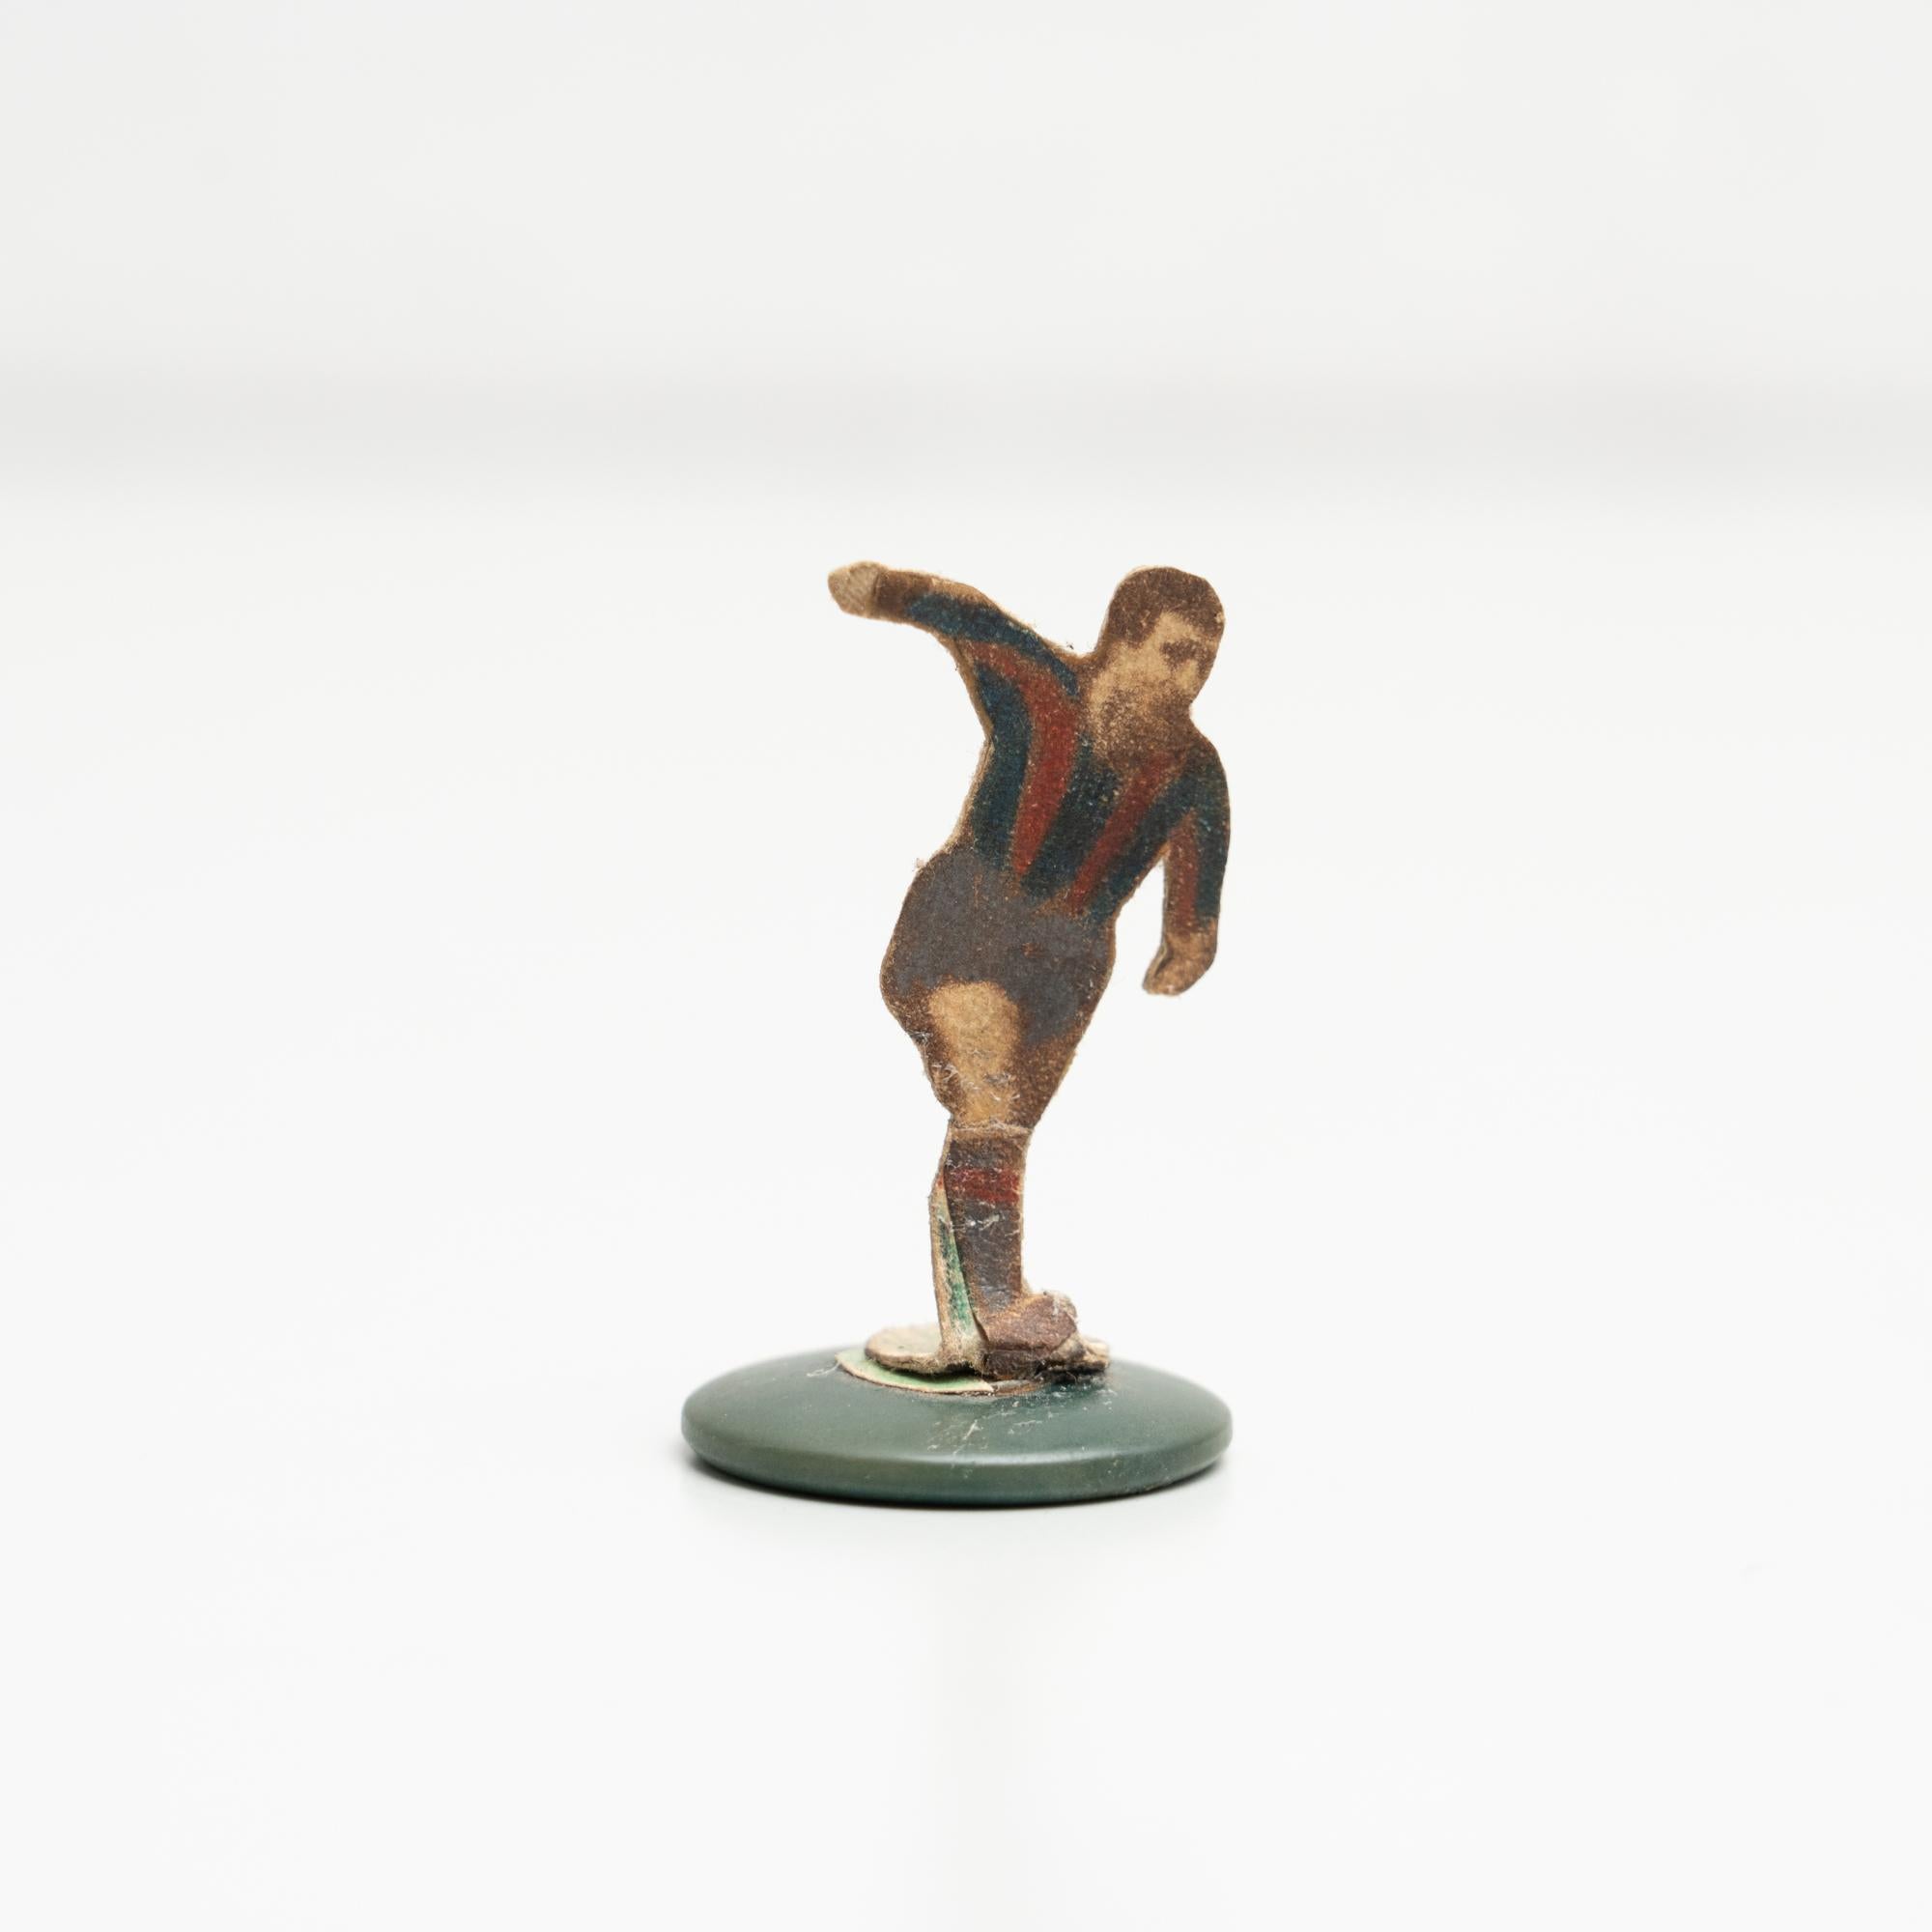 Traditional Antique Button Soccer Game Figure, circa 1950 For Sale 2